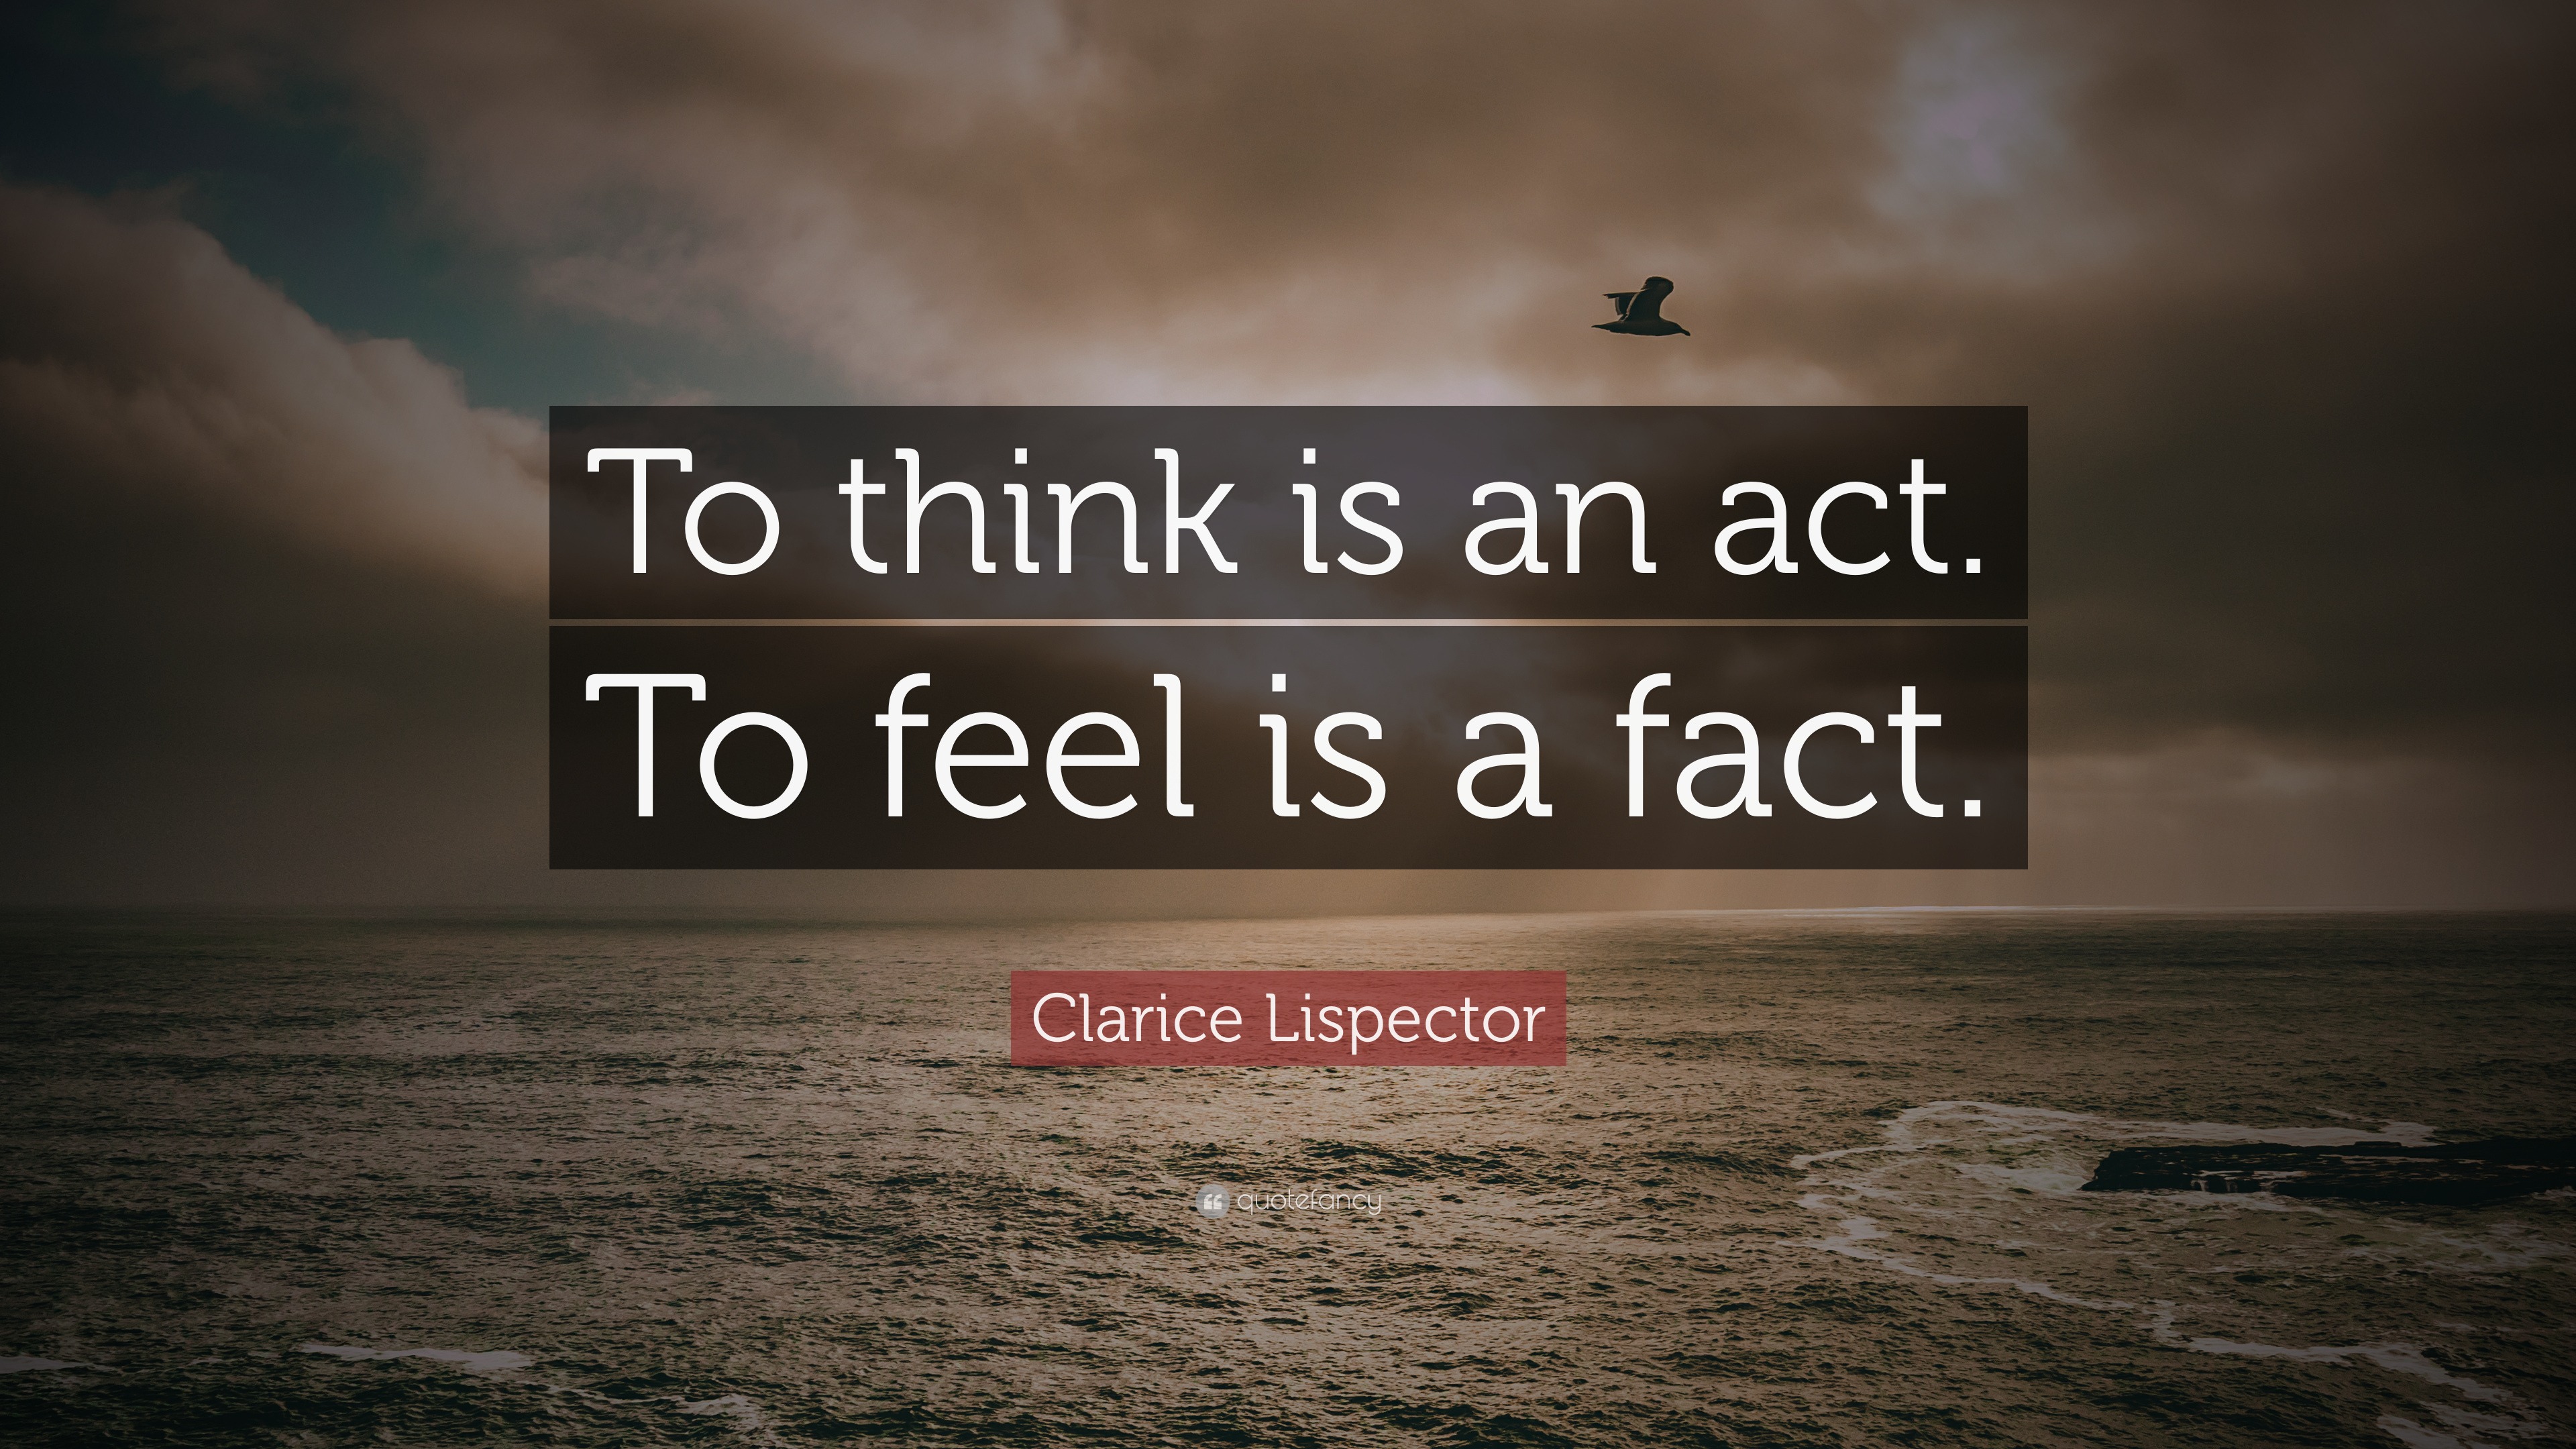 Clarice Lispector Quote To Think Is An Act To Feel Is A Fact Images, Photos, Reviews